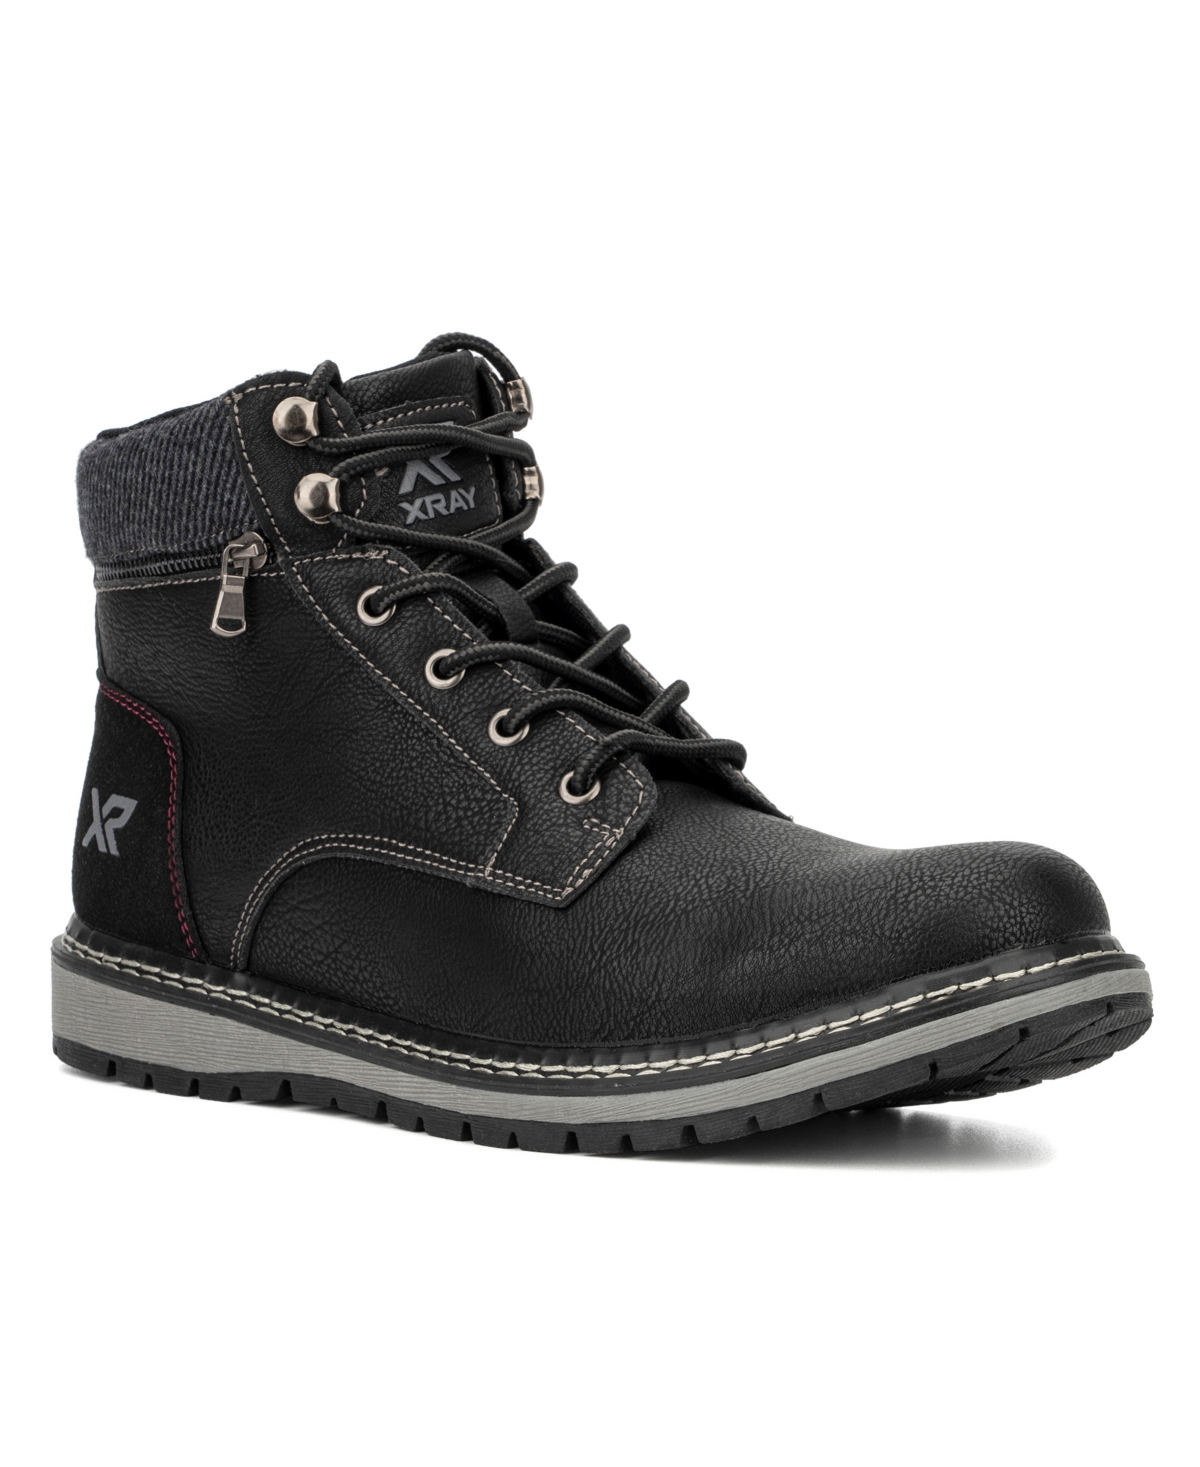 Xray Men's Alistair Lace-Up Boots - Black